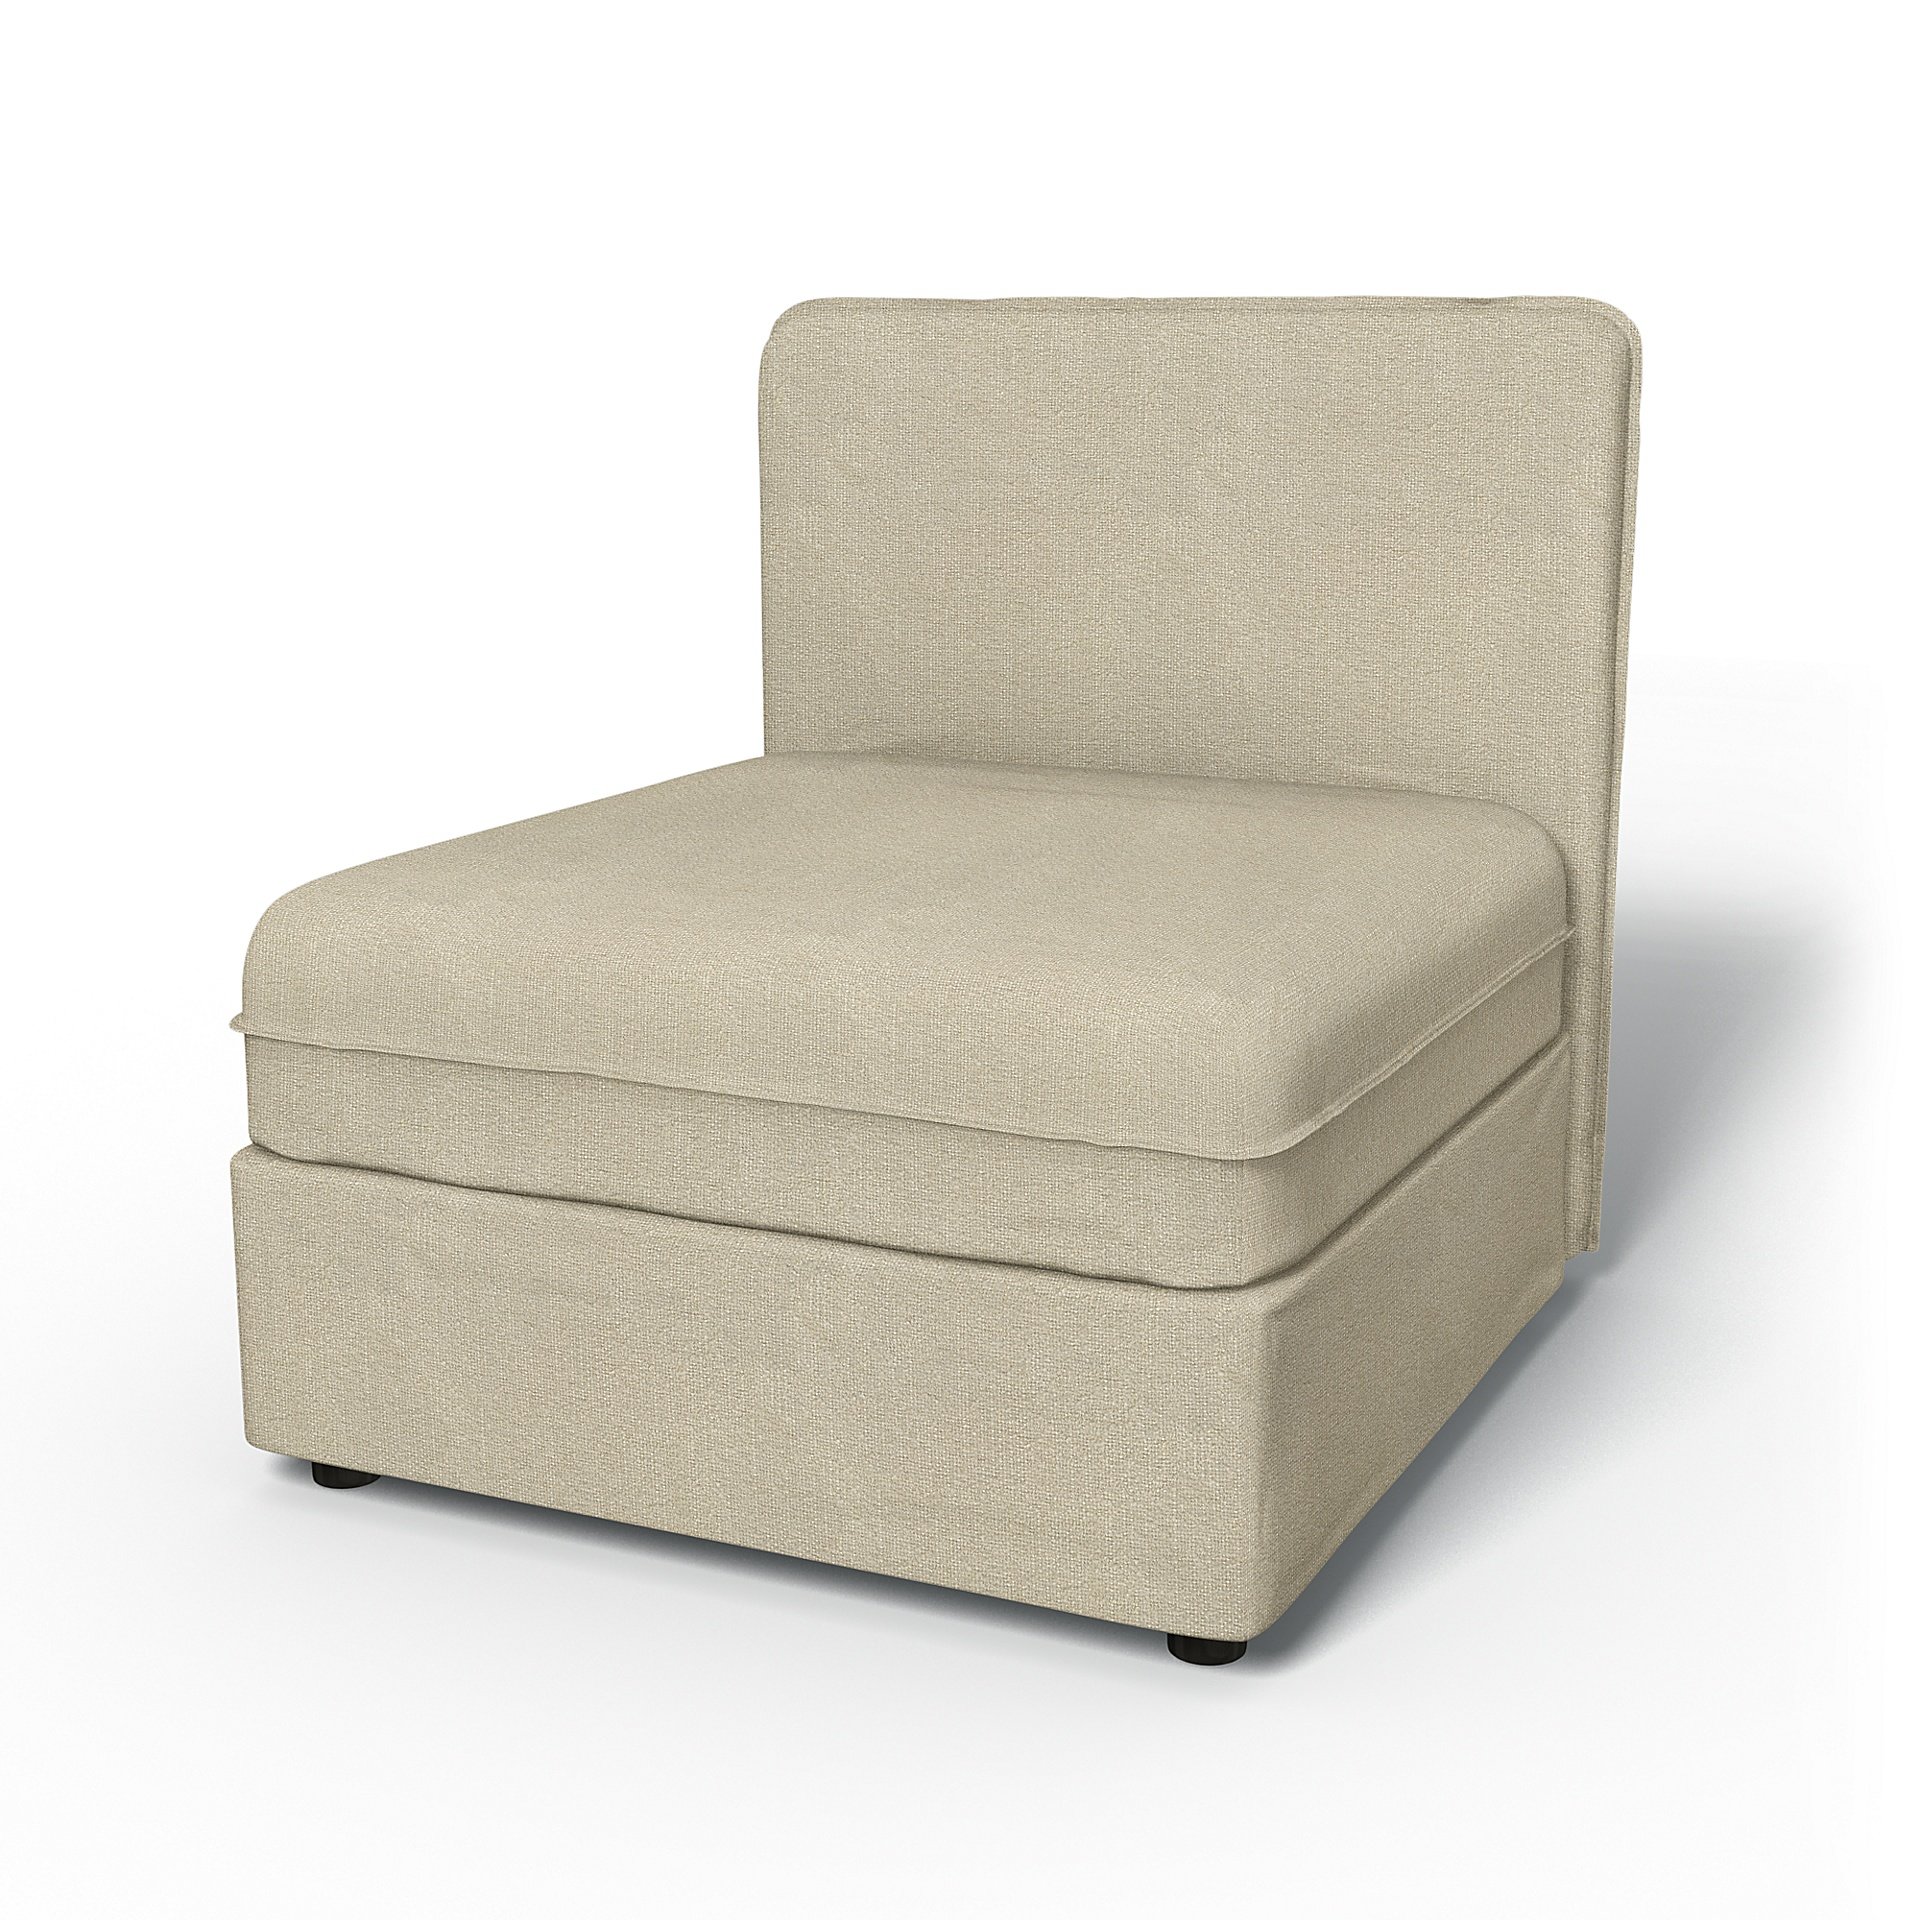 IKEA - Vallentuna Seat Module with Low Back Cover 80x80cm 32x32in, Cream, Boucle & Texture - Bemz